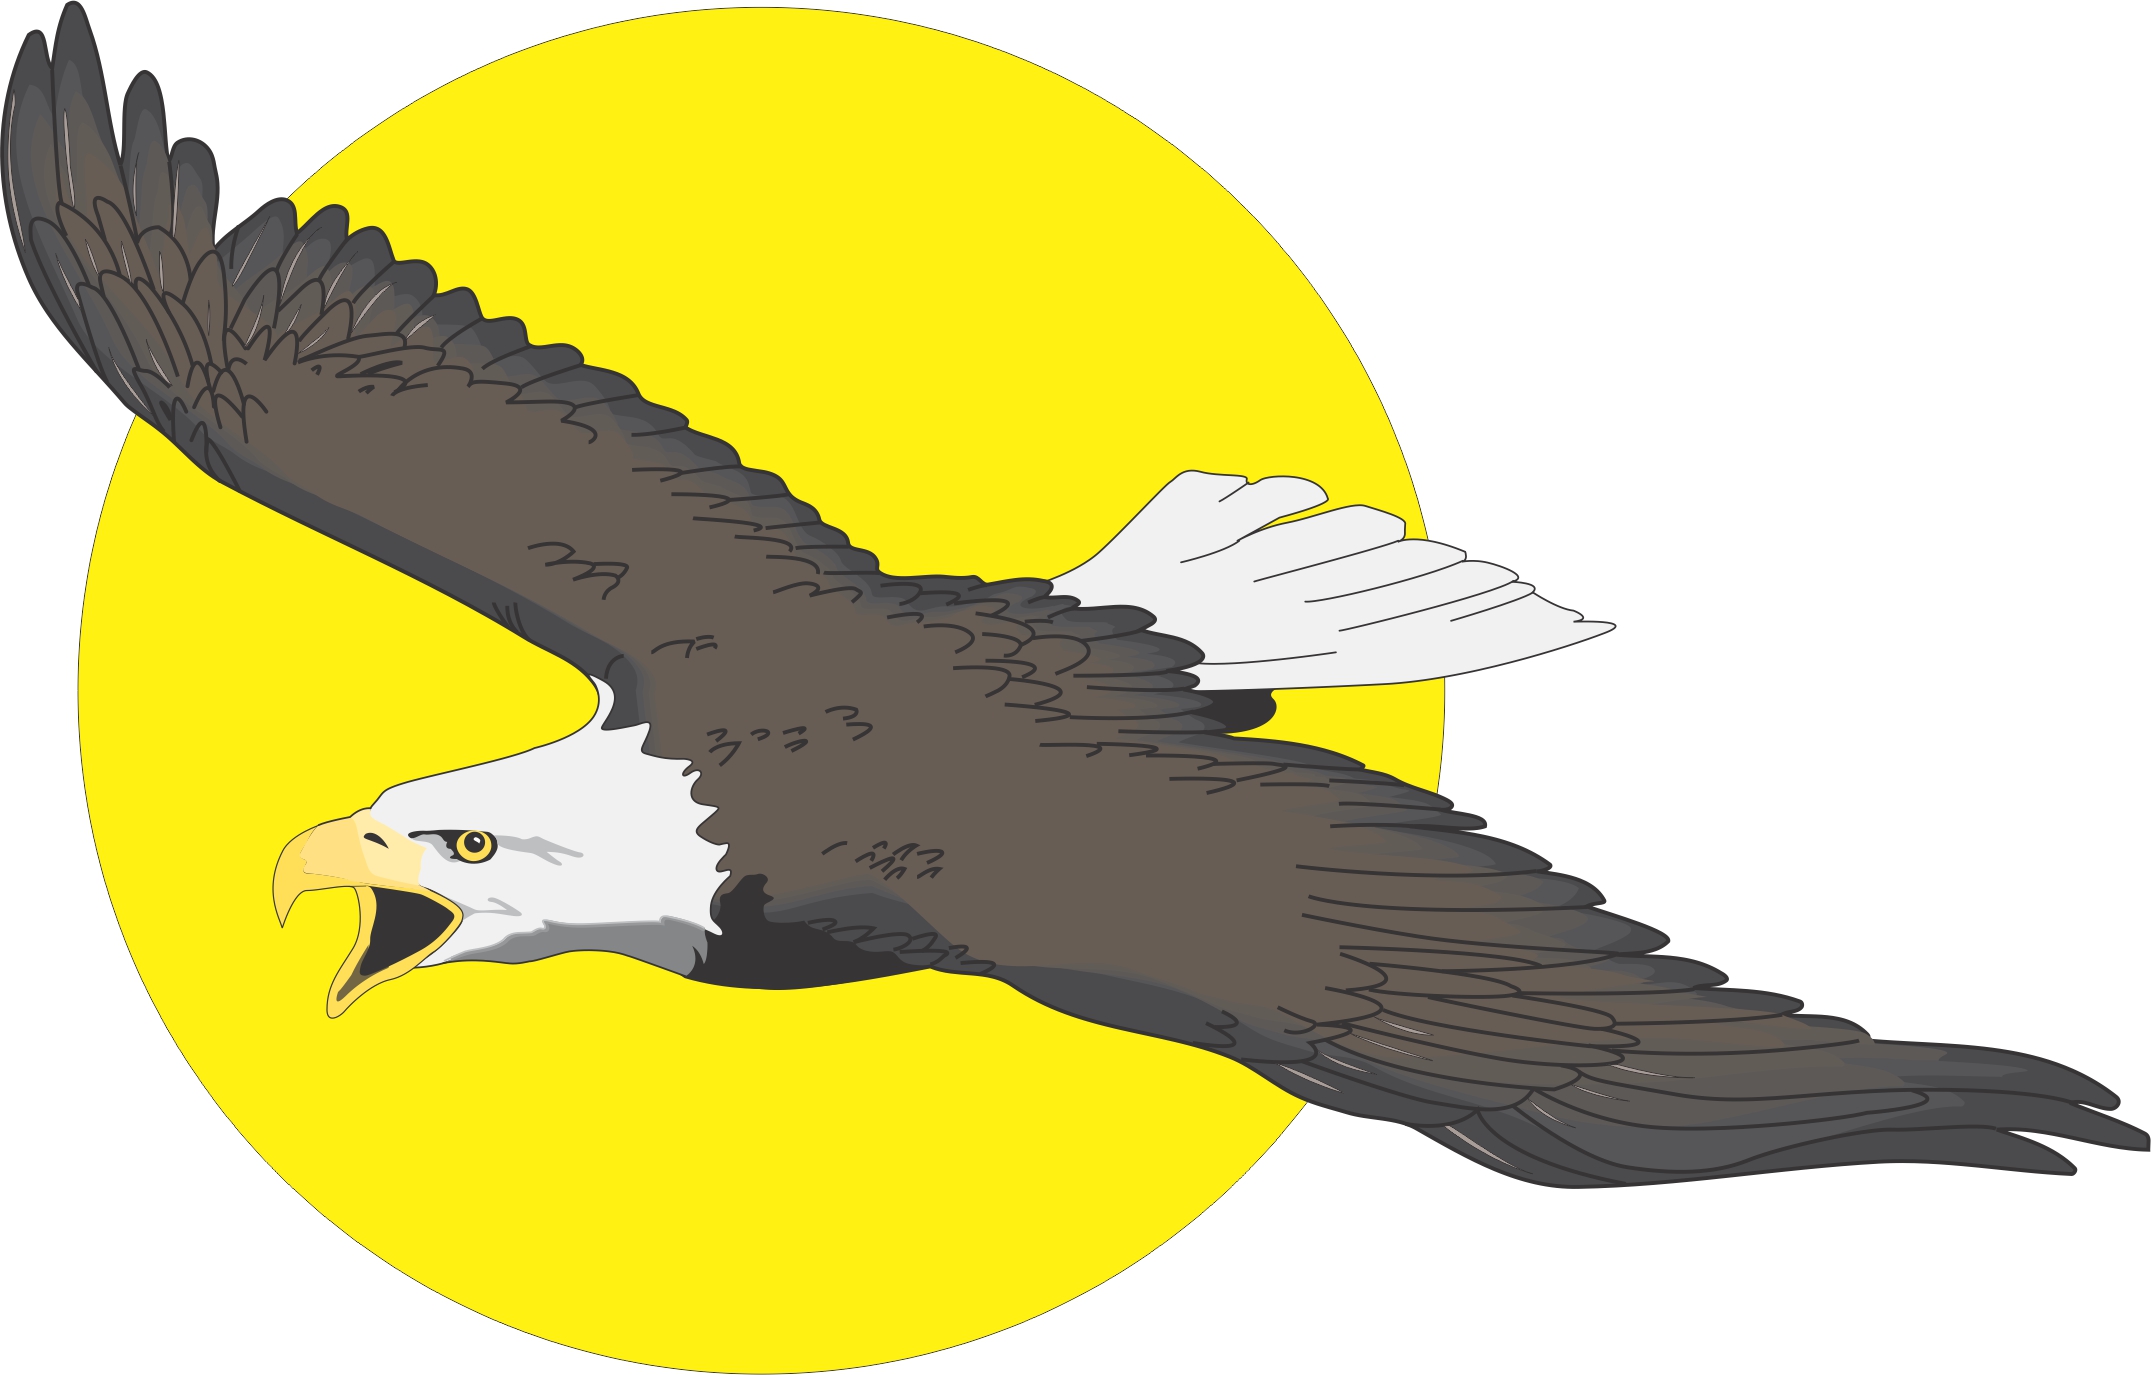 Cartoon Eagle   Page 2   Clipart Best   Clipart Best